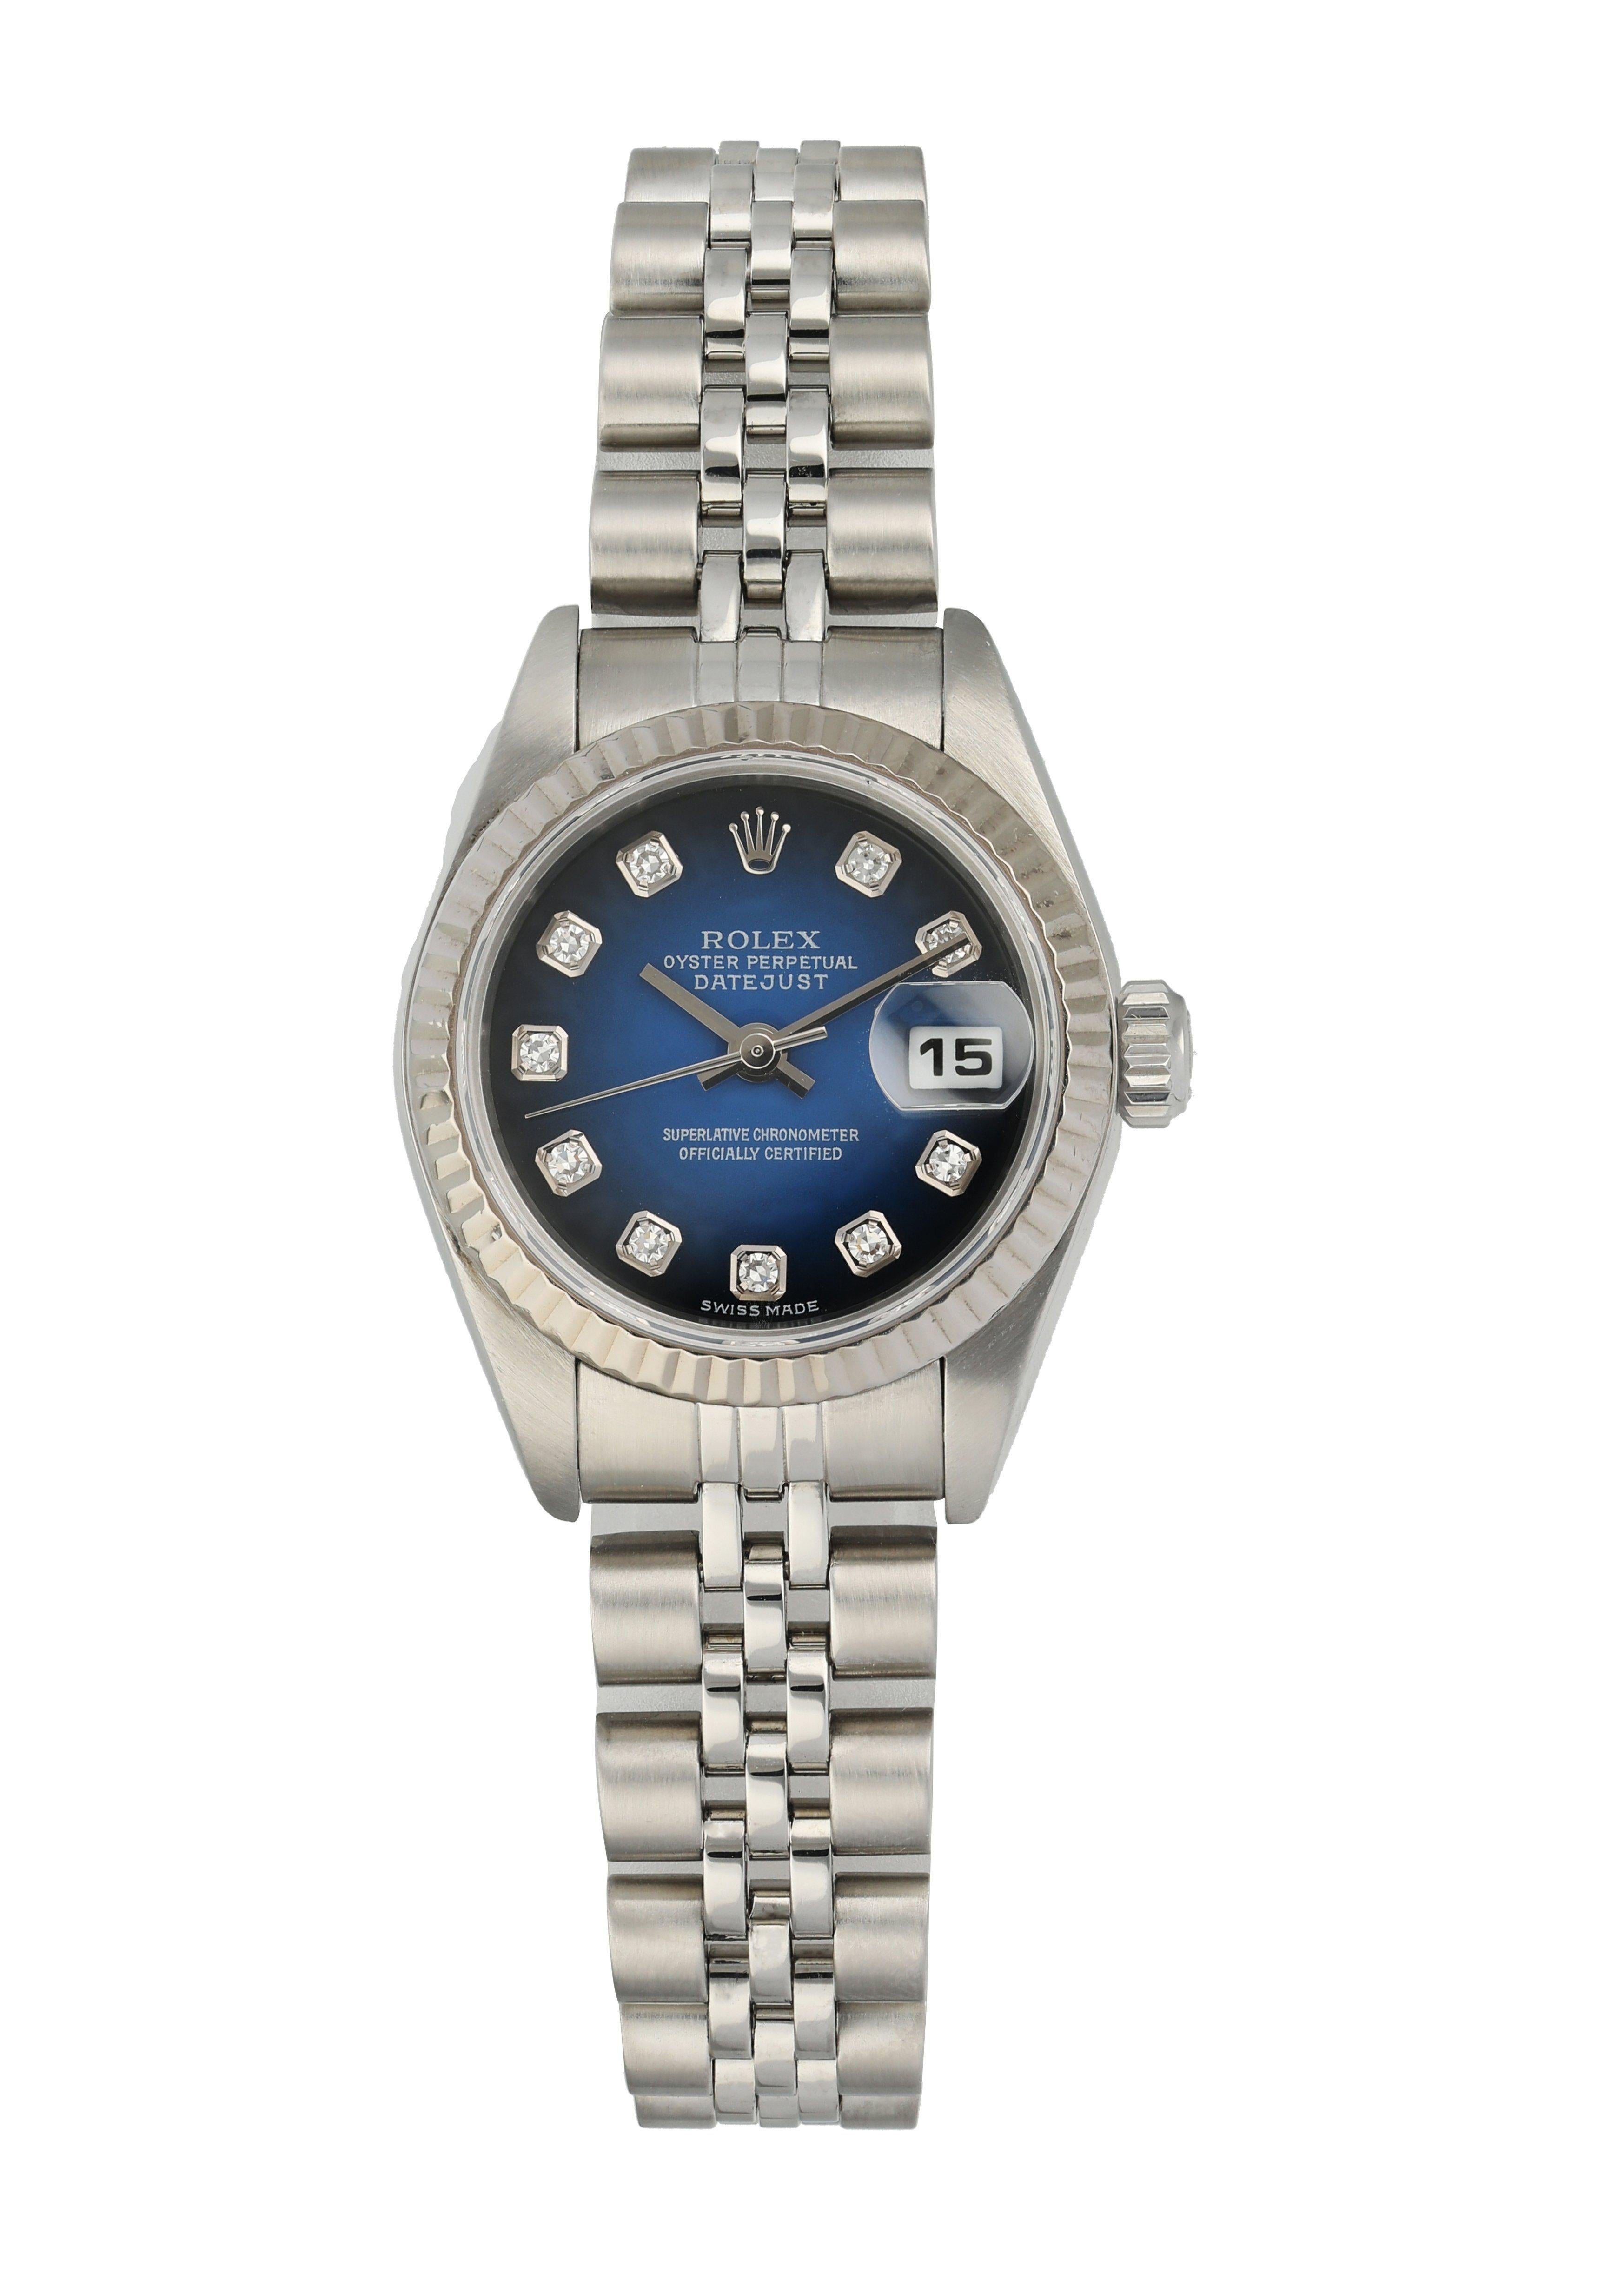 Rolex Datejust 79174 Blue Vignette Diamond Dial Ladies Watch.
26mm Stainless Steel case. 
Stainless Steel fluted bezel. 
Original Blue Vignette diamond dial.
Date display at the 3 o'clock position. 
Stainless Steel Jubilee Bracelet with Fold Over